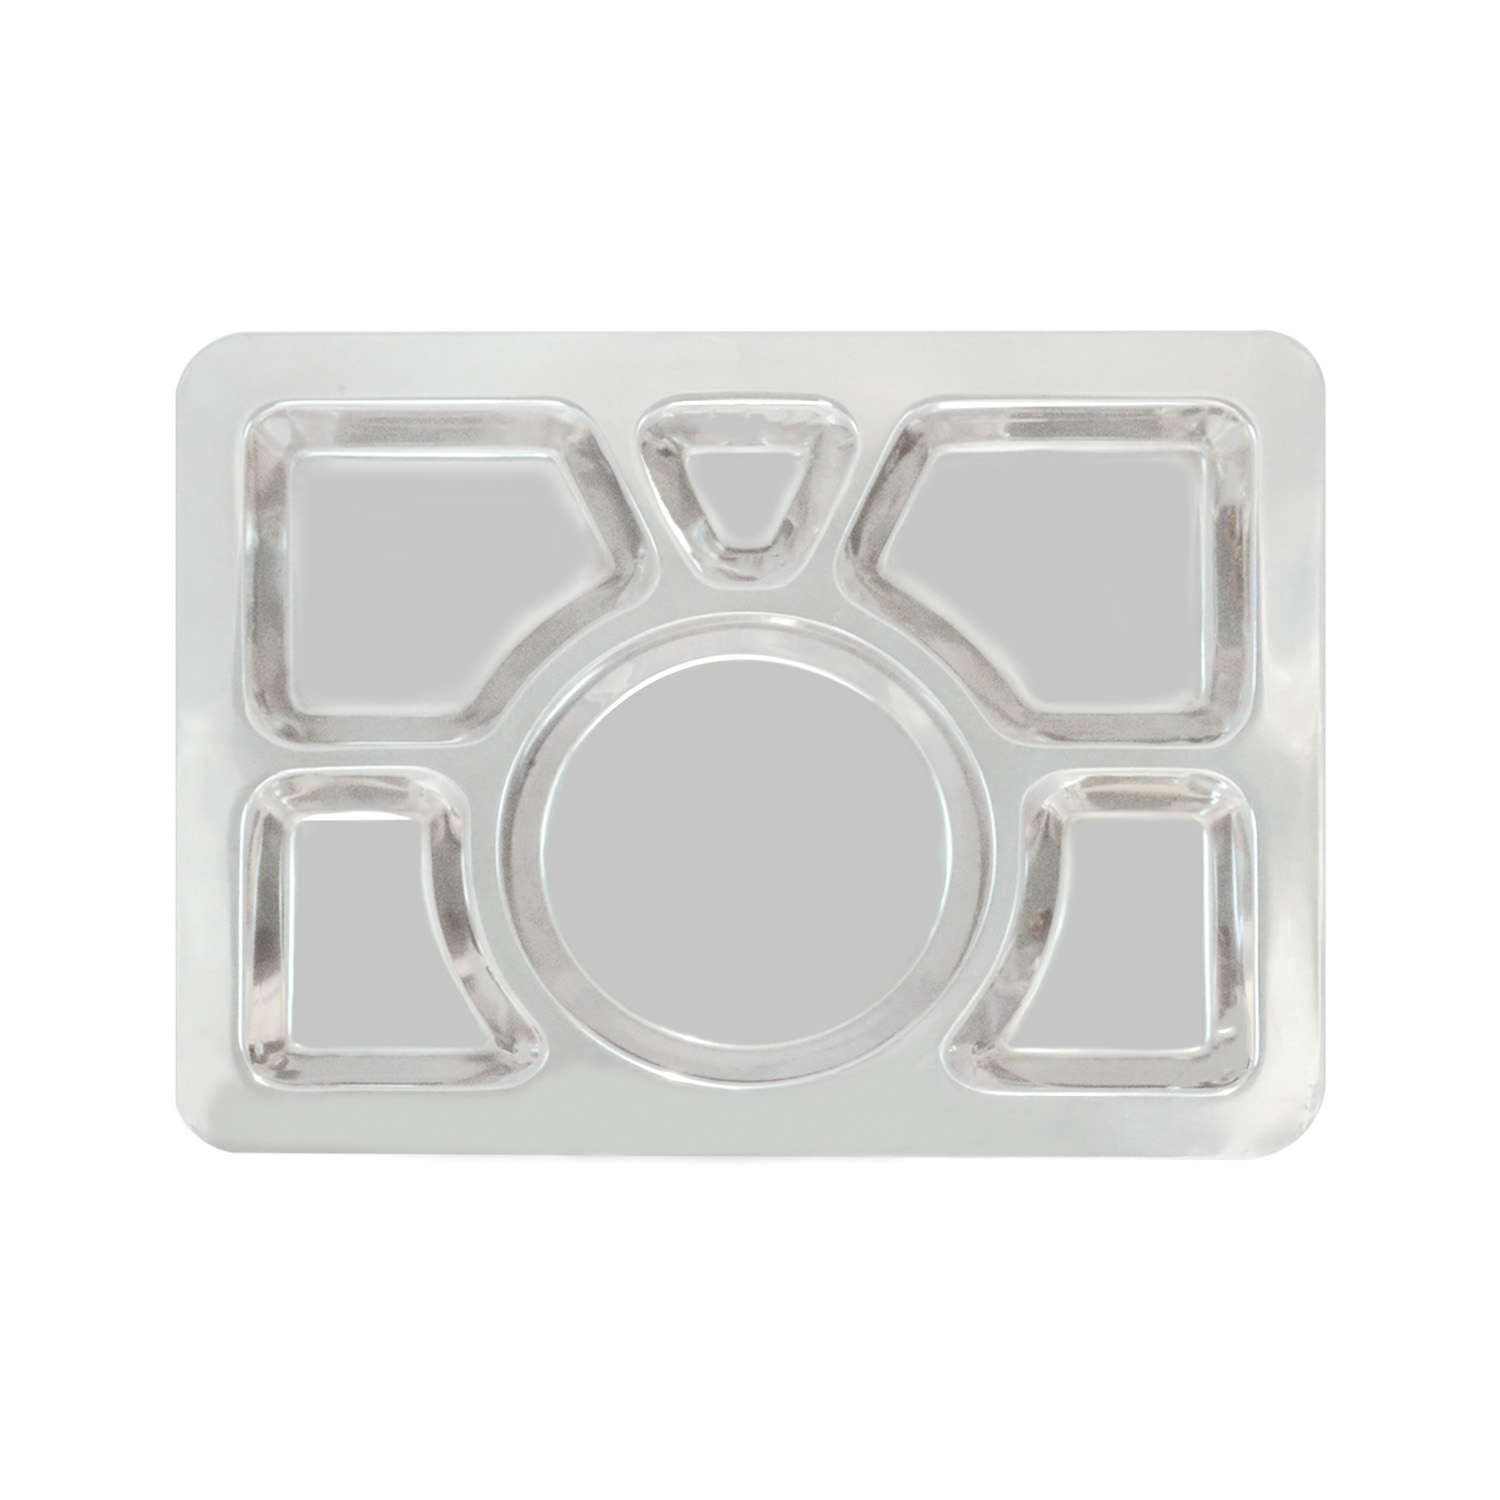 CAC China STRY-6R 6-Compartment Tray with Round Center 15-1/2" x 11-1/2"